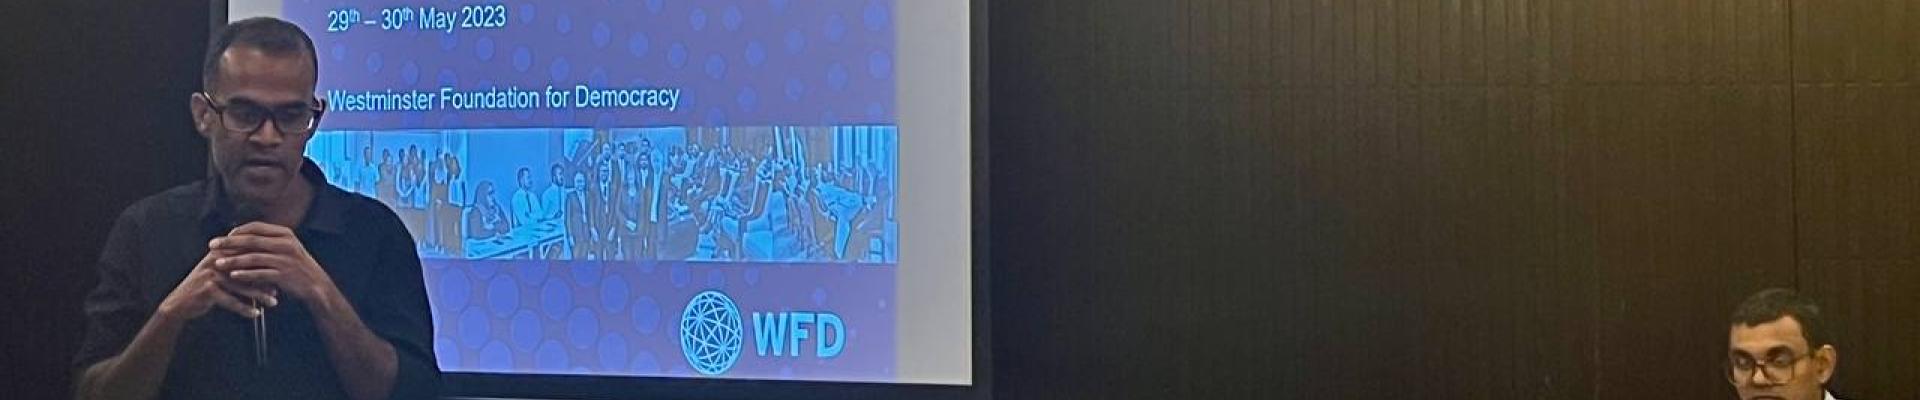 A speaker addressing the audience in a seminar, with a background of WFD slide being projected on the screen 